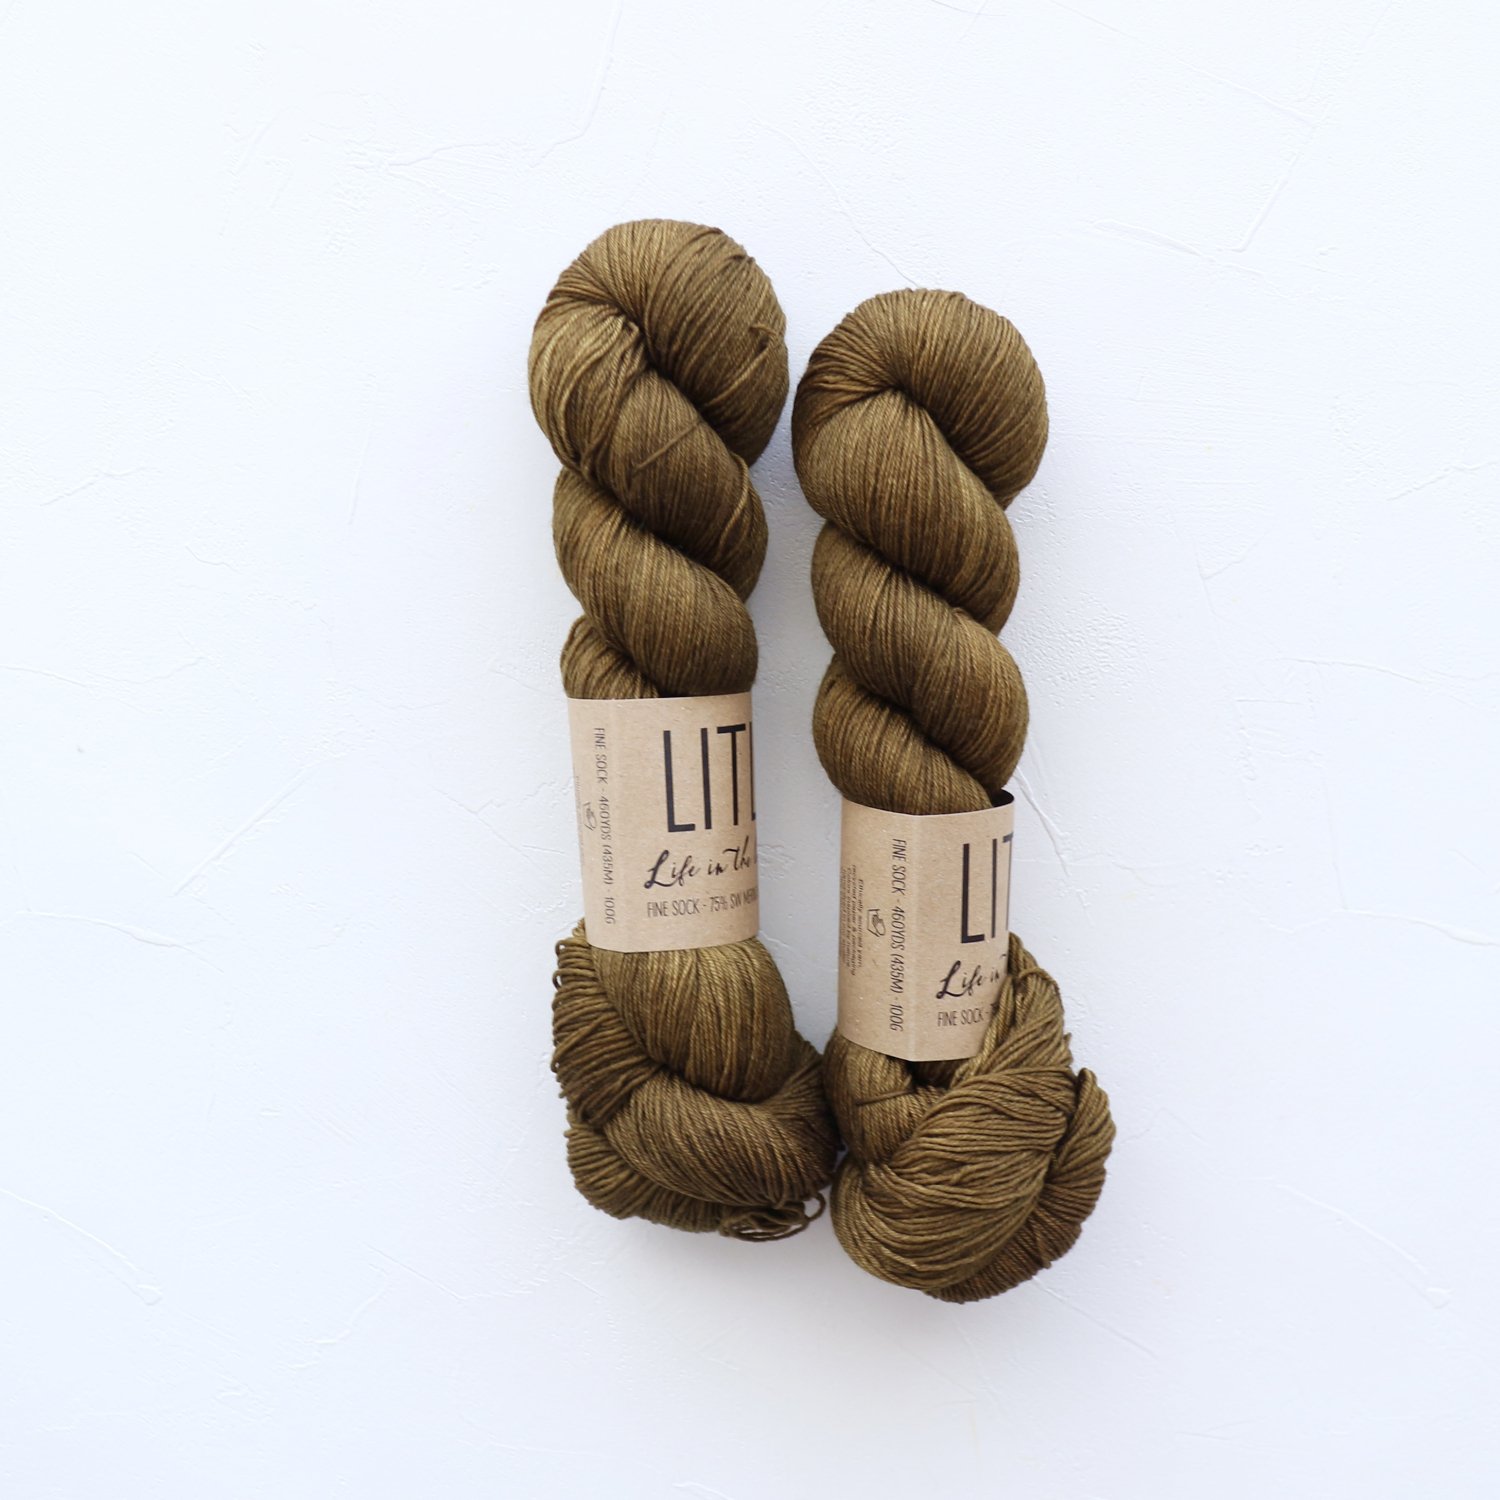 【LIFE IN THE LONGGRASS】<br>Fine Sock<br>Grove